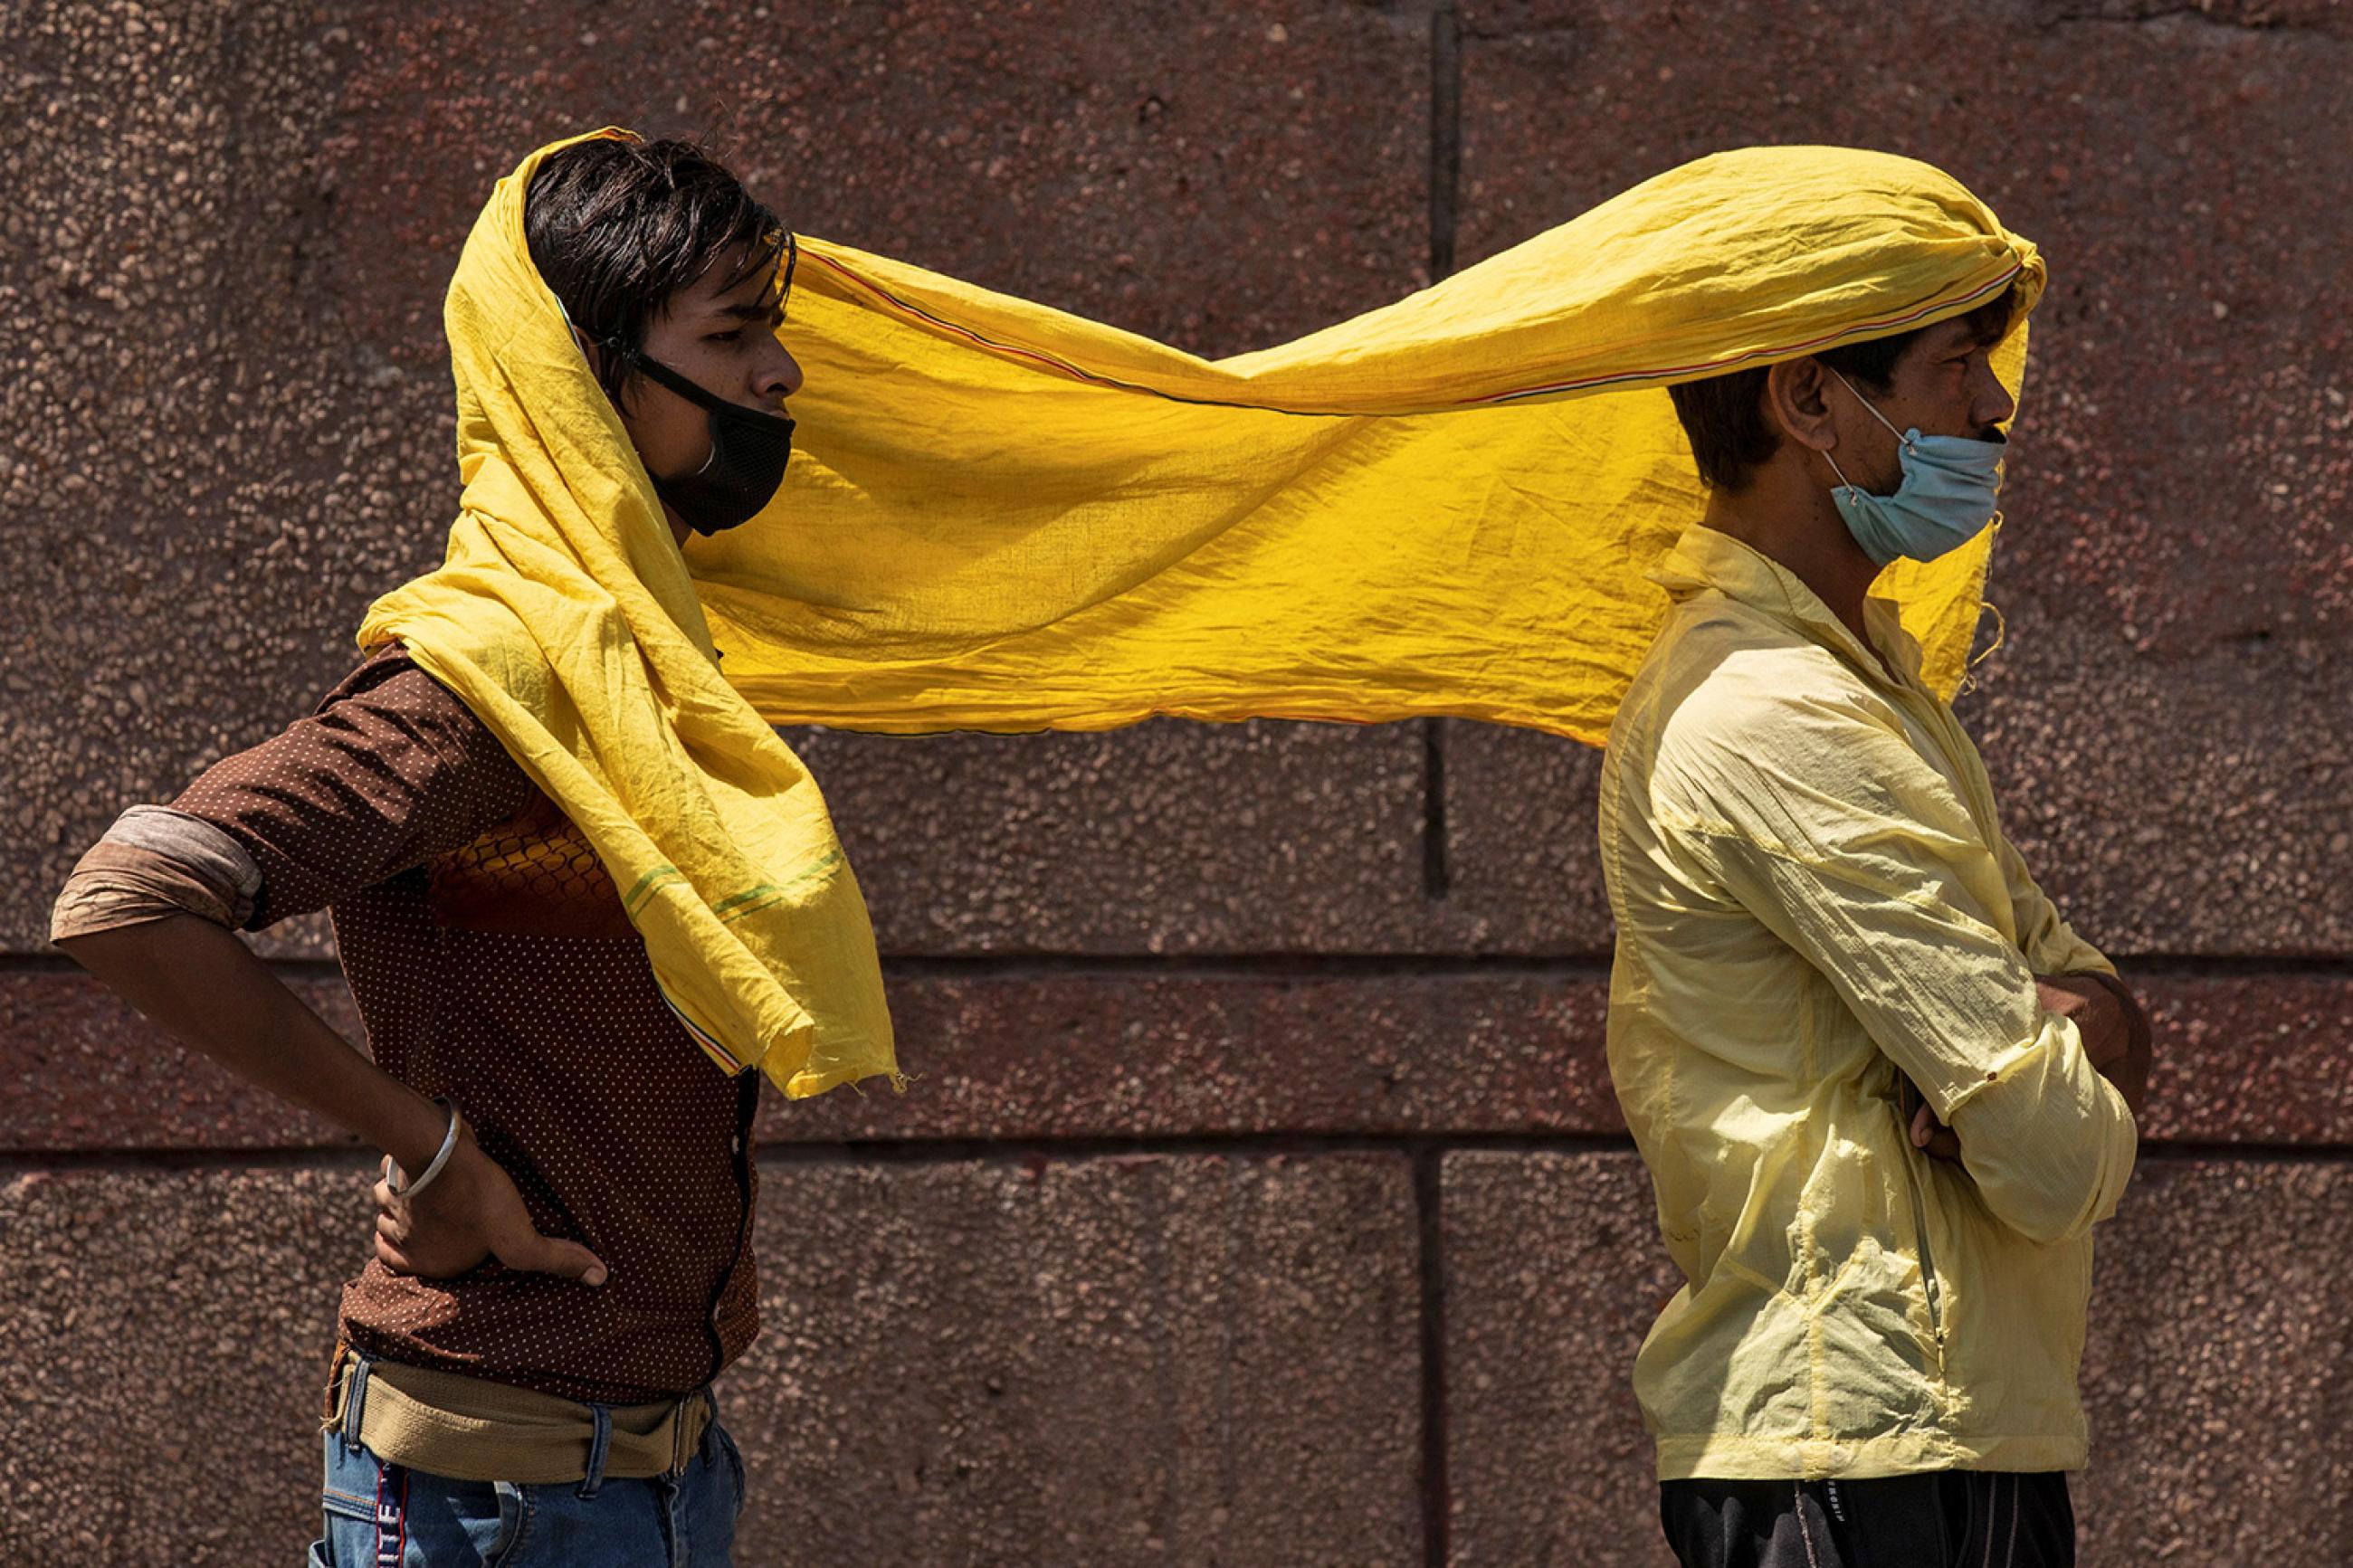 Migrant workers protect themselves from heat as they wait to board a train to their home state of eastern Bihar, at the end of the coronavirus lockdown in New Delhi, India, on May 21, 2020. The image shows two men sharing a yellow scarf. REUTERS/Danish Siddiqui